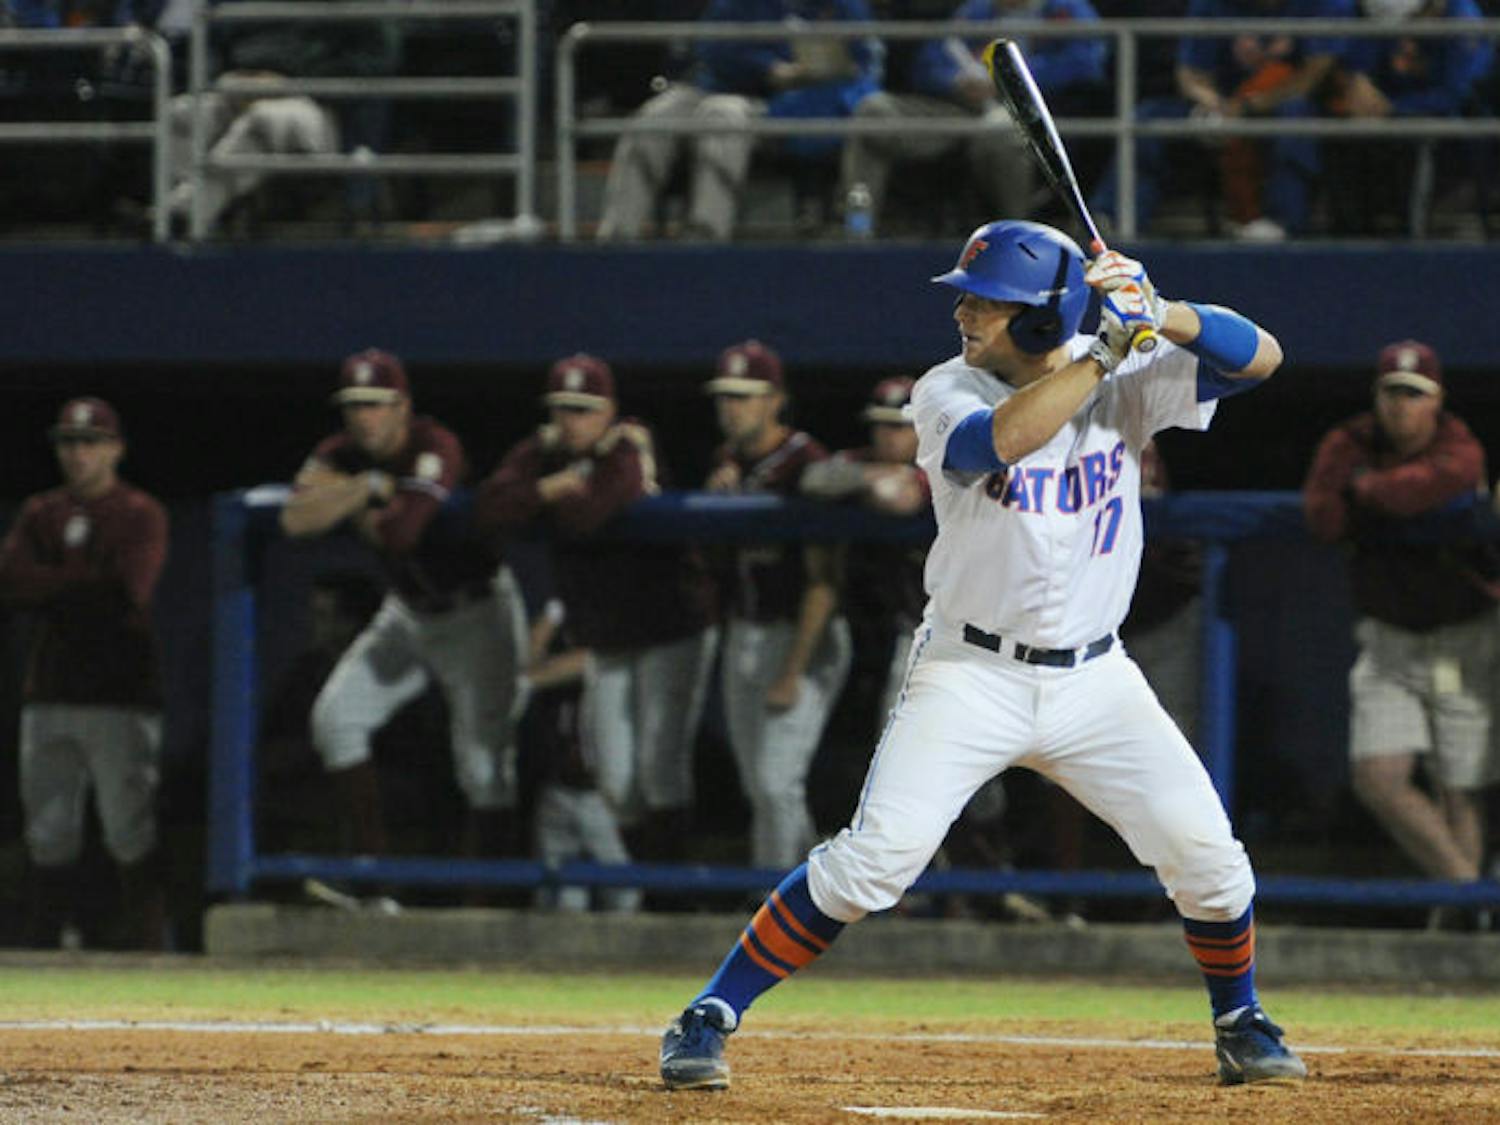 Taylor Gushue bats during Florida’s 3-1 win against Florida State on March 18 at McKethan Stadium. Gushue hit a single to start a four-run rally in the eighth inning of UF’s 6-5 win against USC on Sunday.